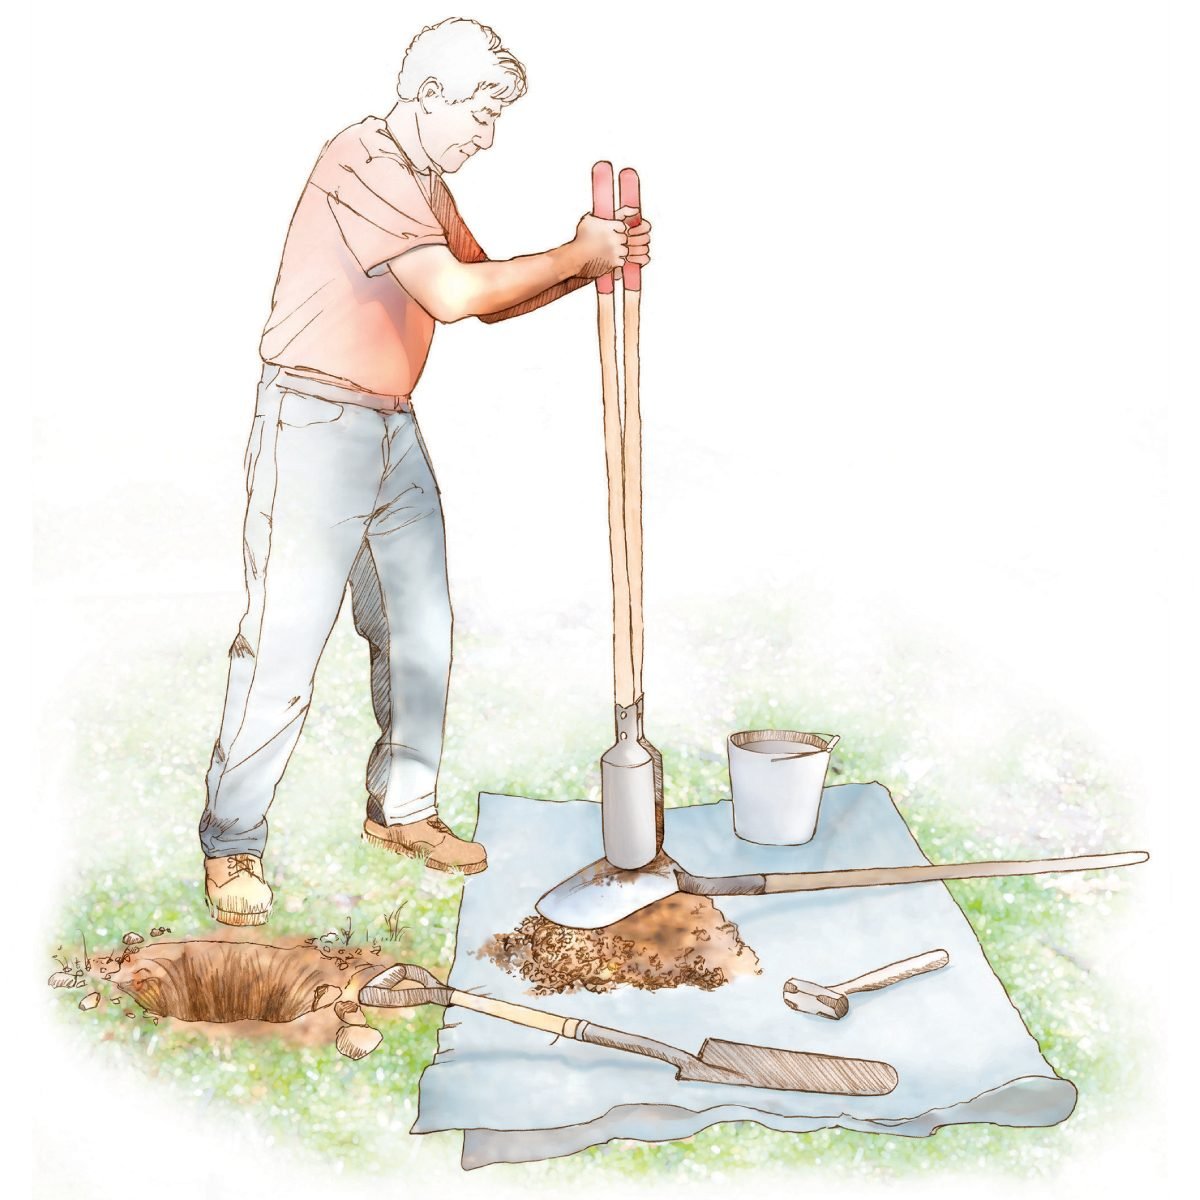 How To Dig a Fence Post Hole the Right Way